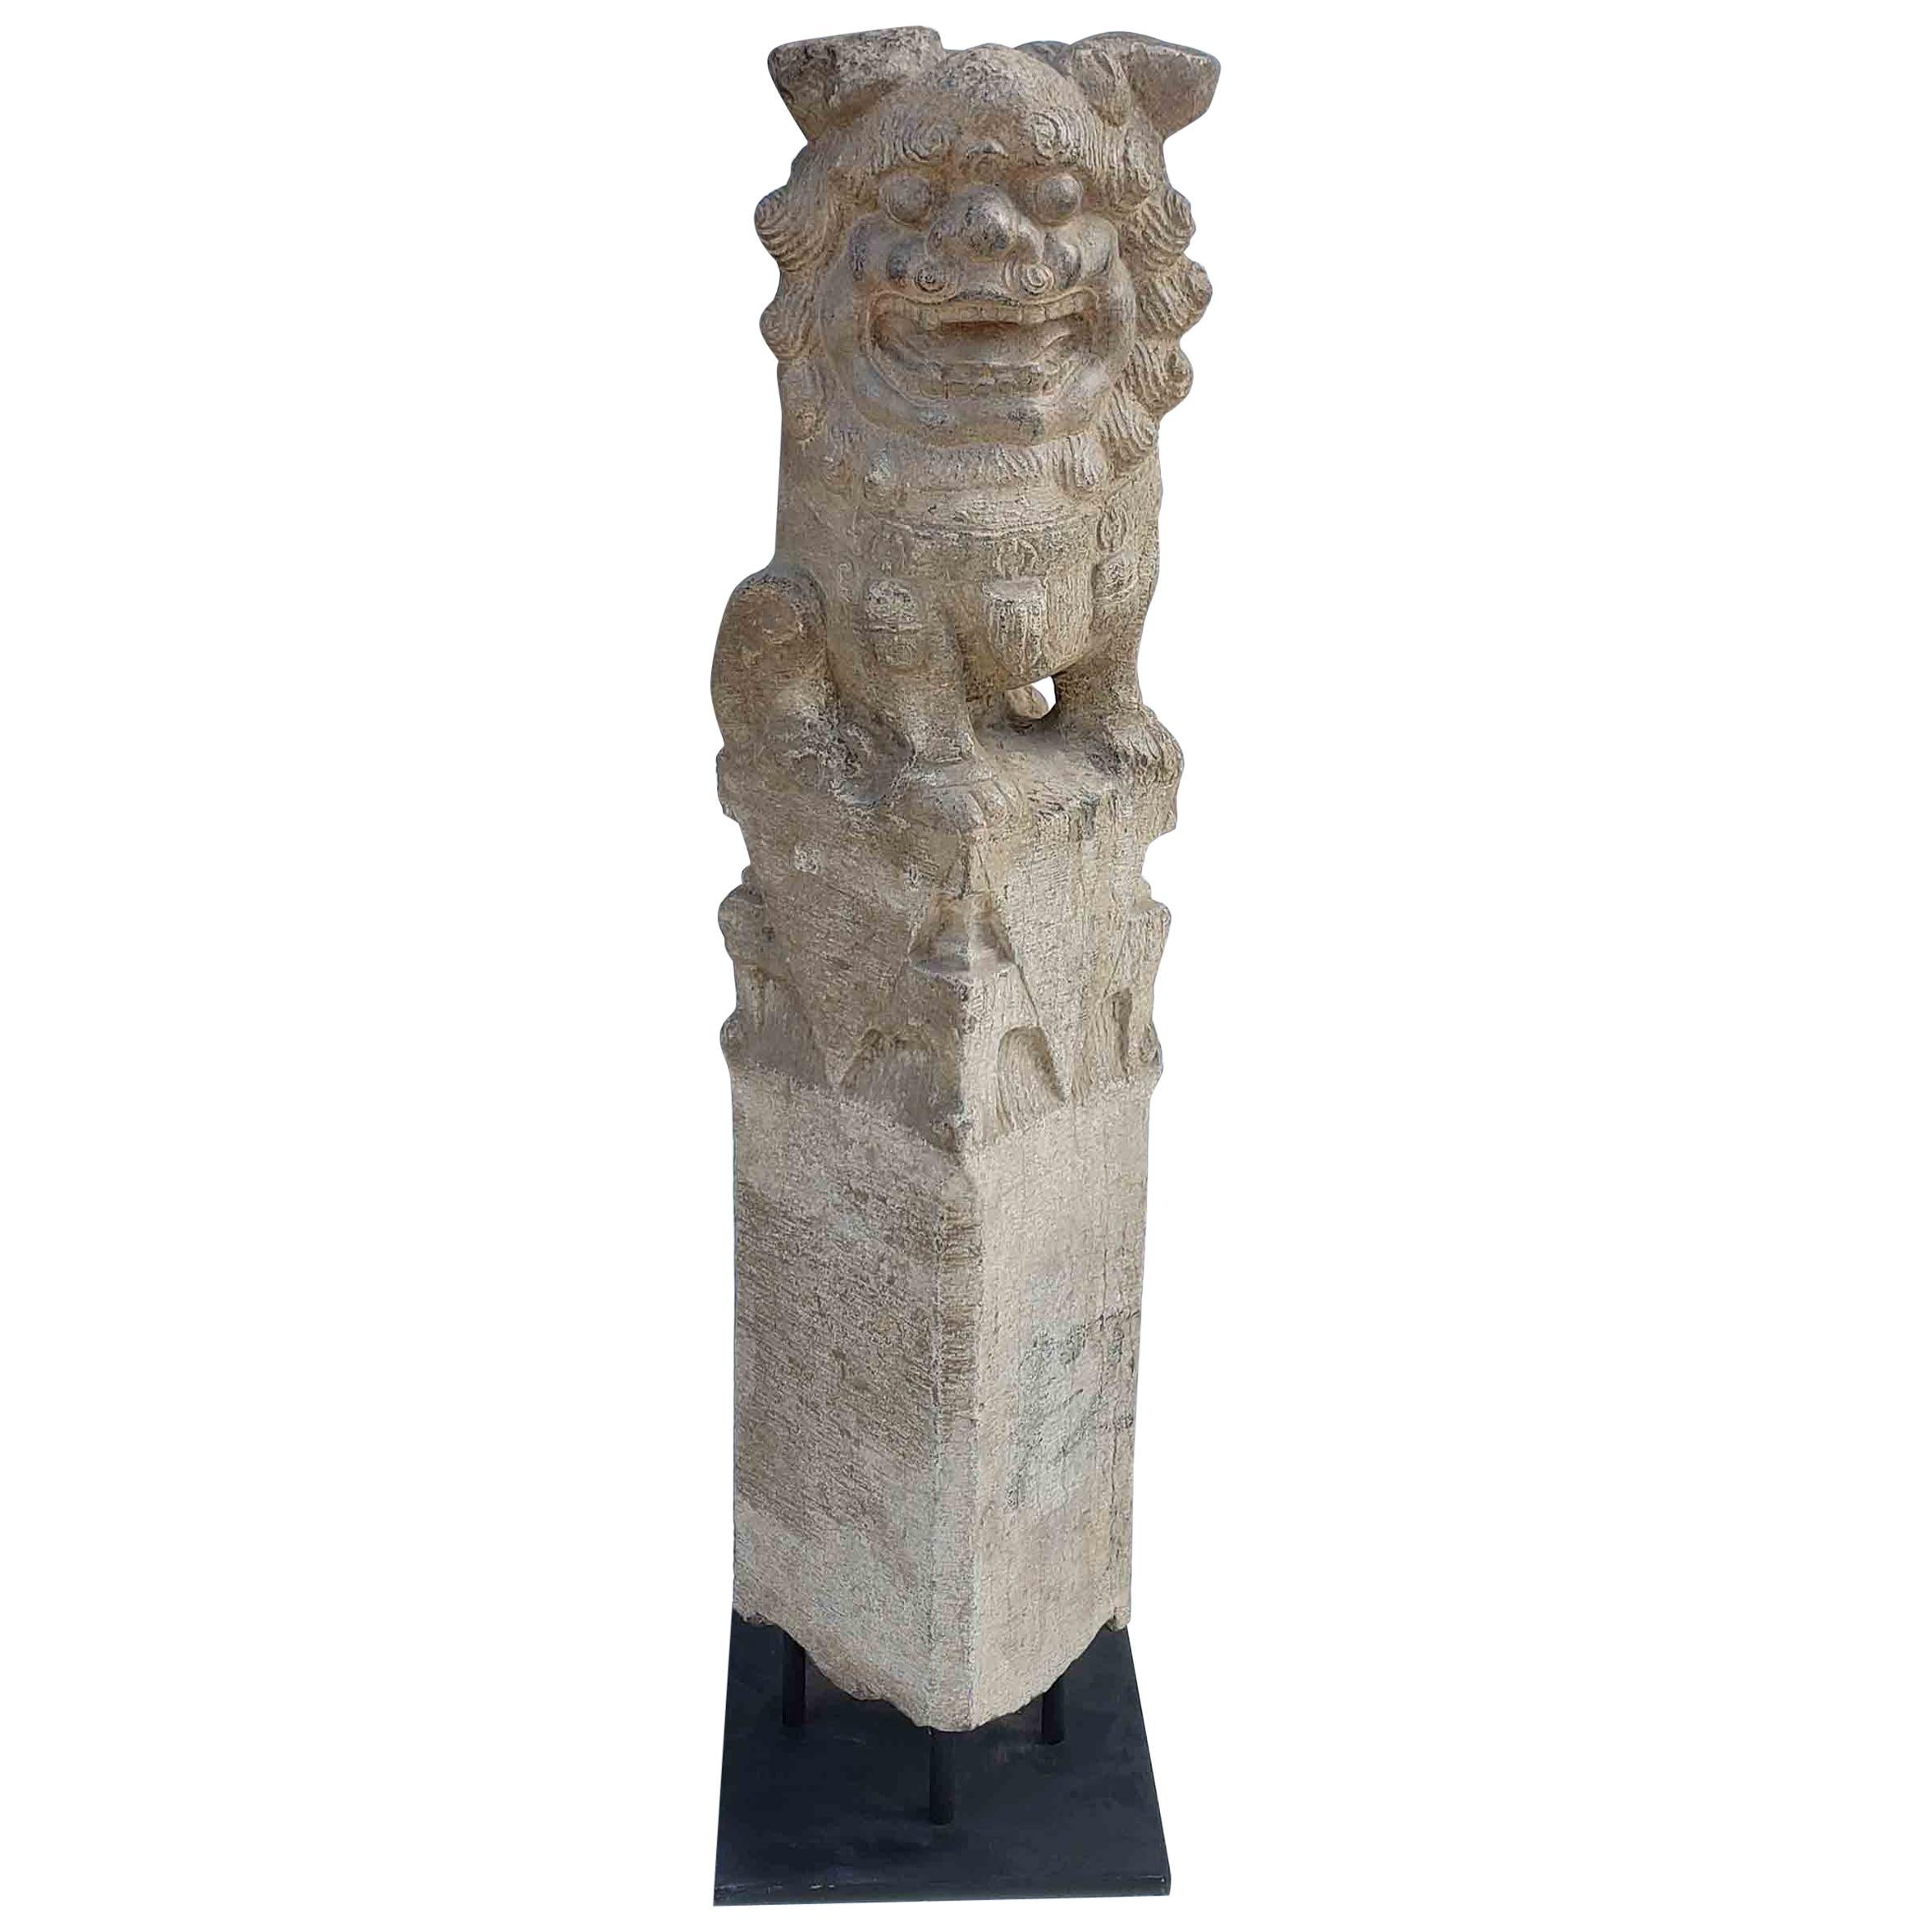 Chinese Foo Dog Hitching Post Sculpture in Solid Granite, Early 20th Century